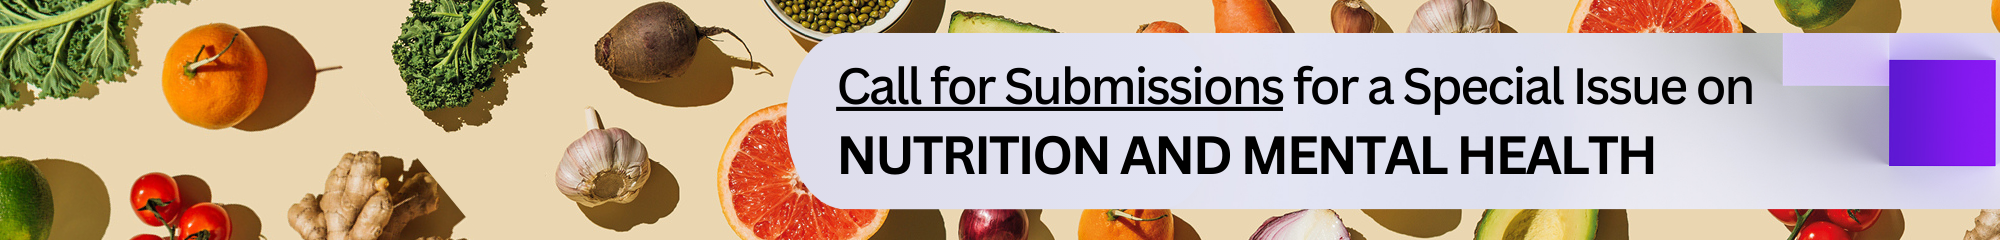 British Journal of Nutrition Call for submissions for a Special Issue on Nutrition and Mental Health